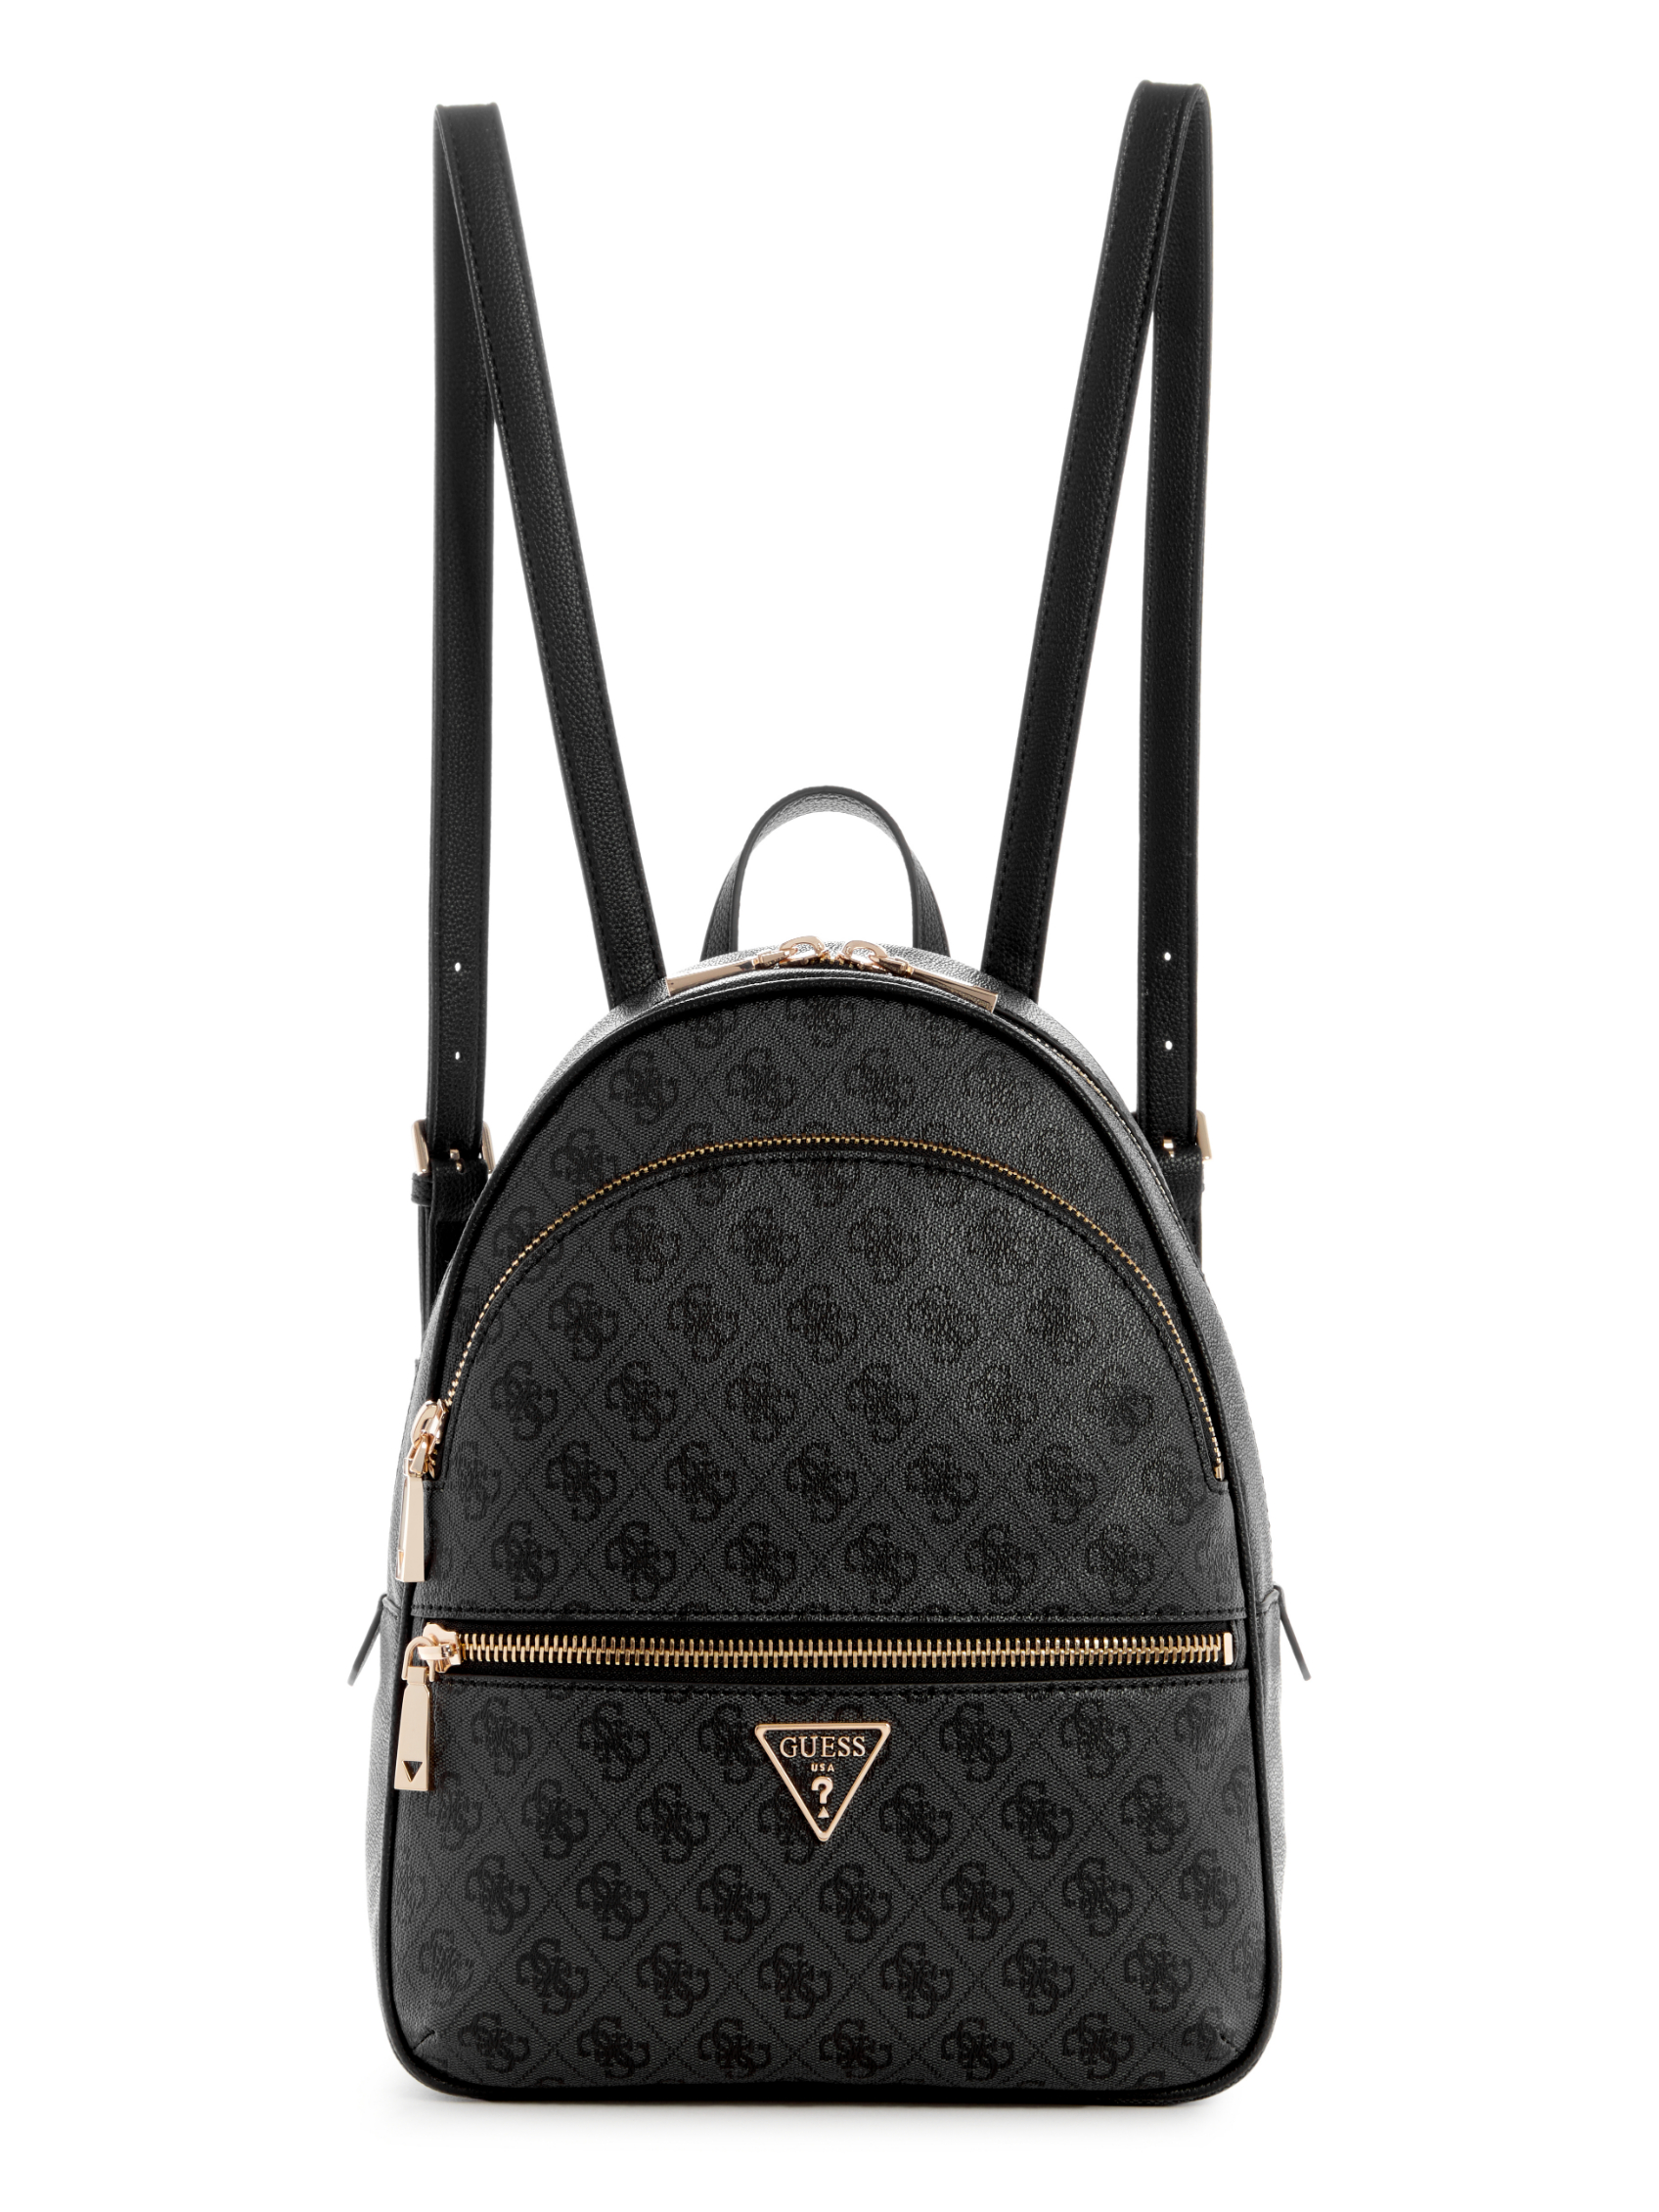 MANHATTAN LARGE BACKPACK | Guess Philippines